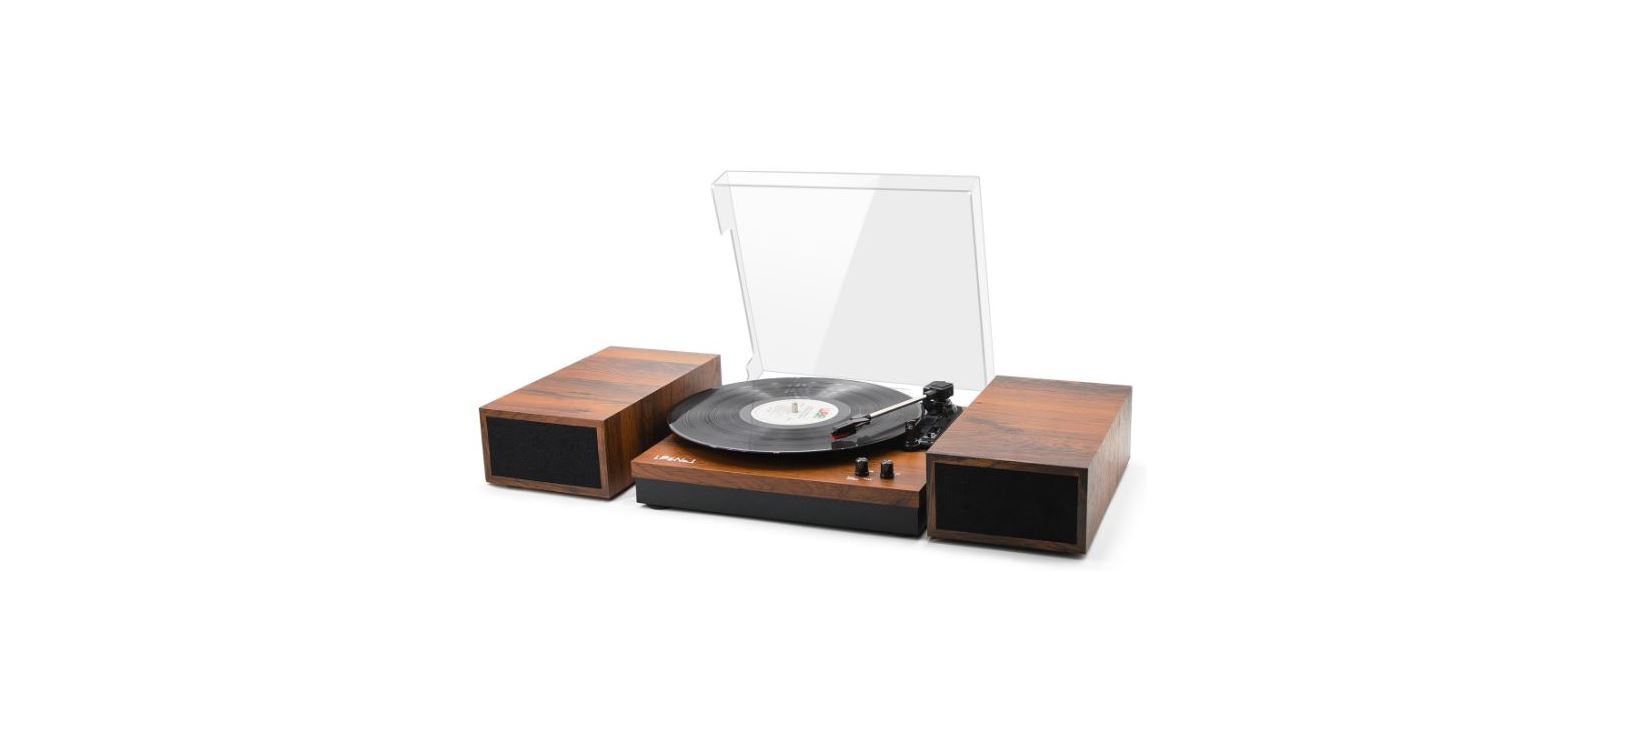 LPSC-025 Record Player